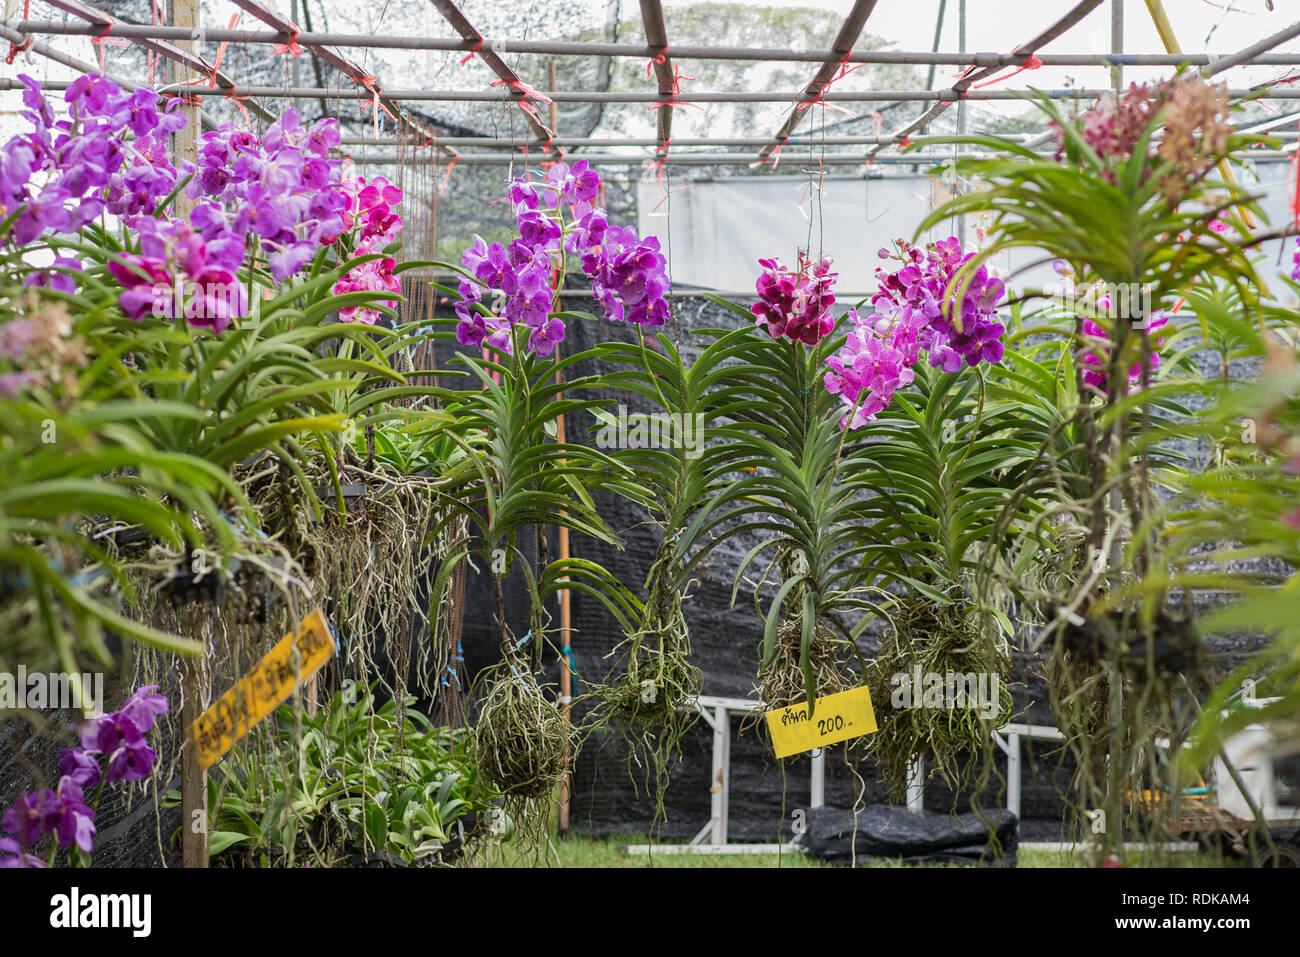 Hanging orchid plants with flowers for sale with a price tag "each 200" ( Thai baht). At the plant fair in King Rama IX Park, Bangkok, Thailand Stock  Photo - Alamy